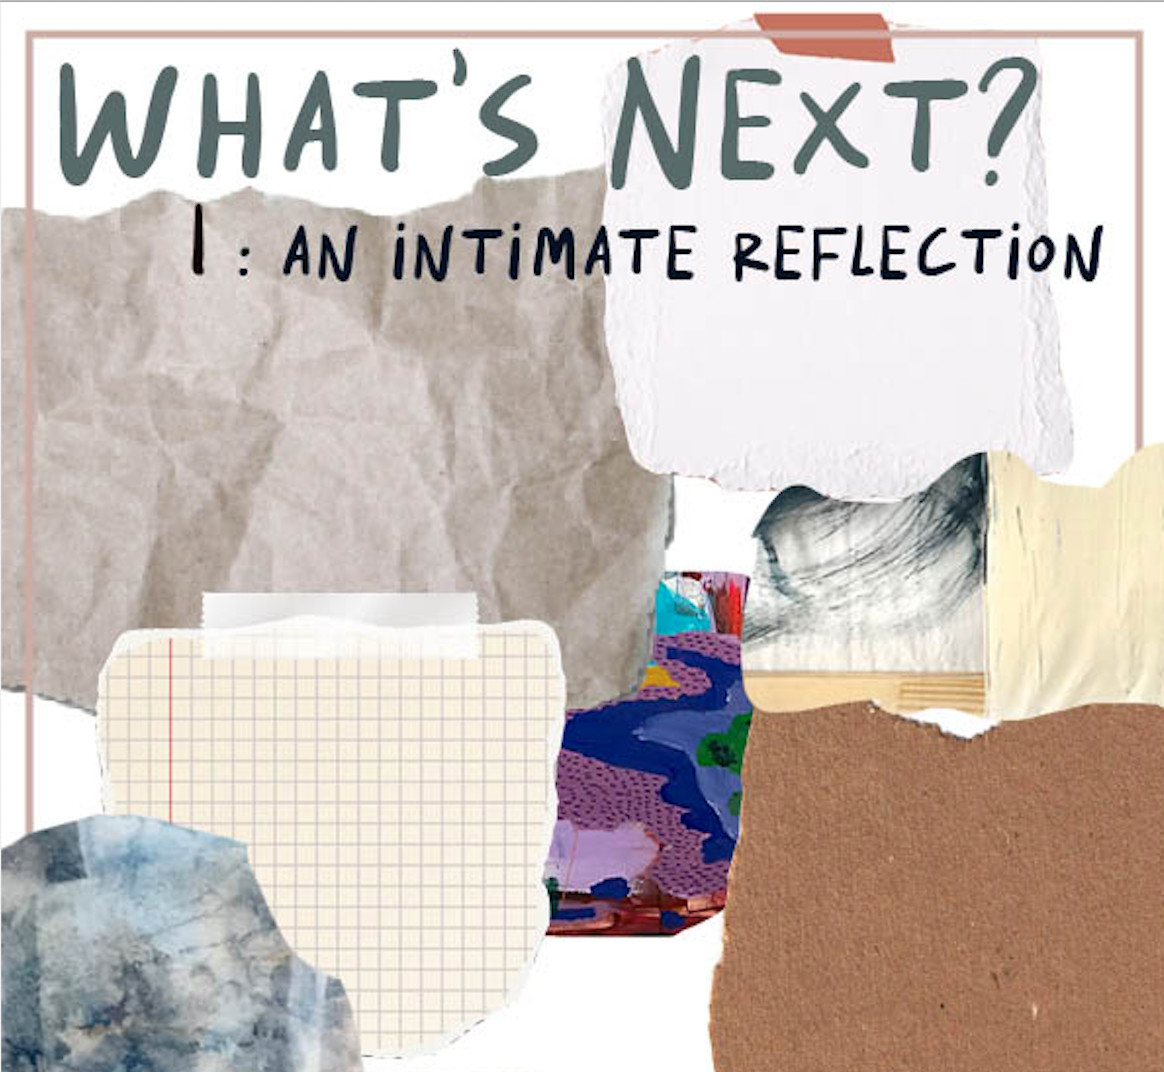 I an intimate reflection poster collage of paper